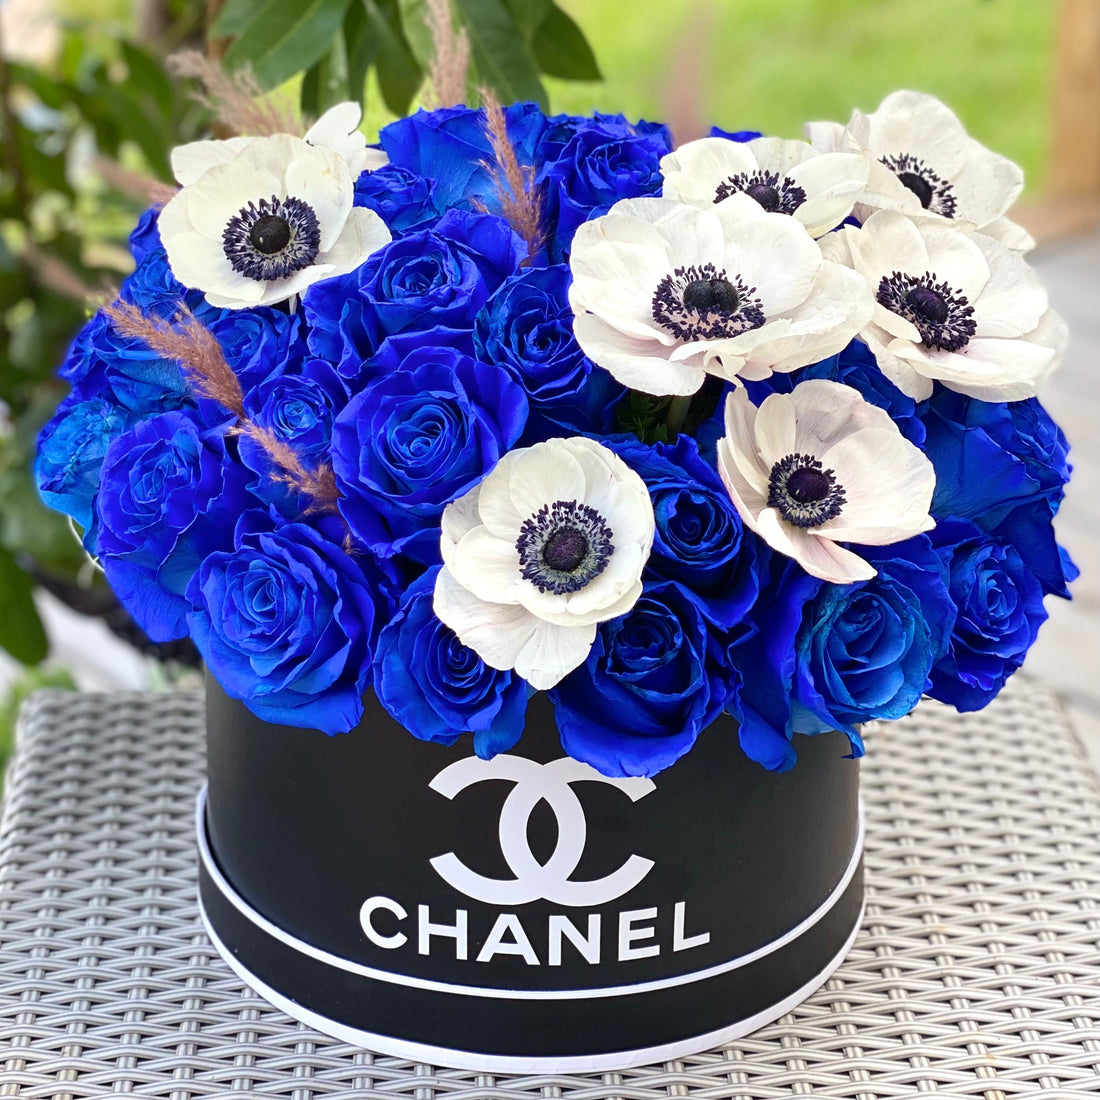 Midnight Bliss Chanel: Fresh Tinted Roses